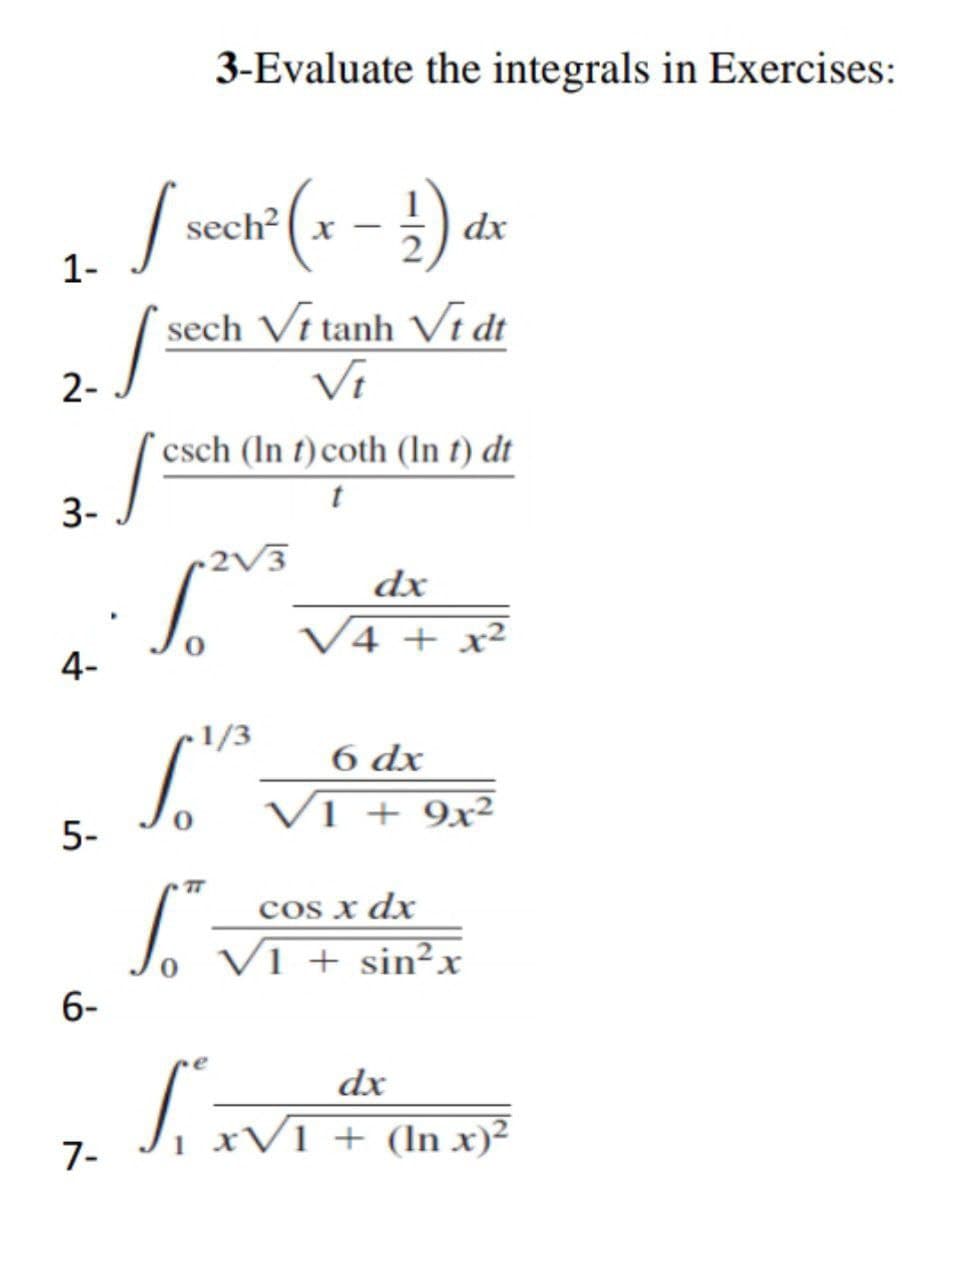 3-Evaluate the integrals in Exercises:
S sech (x - ) dx
1-
sech Vt tanh Vĩ dt
Vi
2-
csch (In t) coth (ln t) dt
t
3-
dx
V4 + x²
4-
1/3
6 dx
Vi + 9x²
5-
TT
cos x dx
VI + sin²x
6-
dx
1.VI + (In x)²
7-
